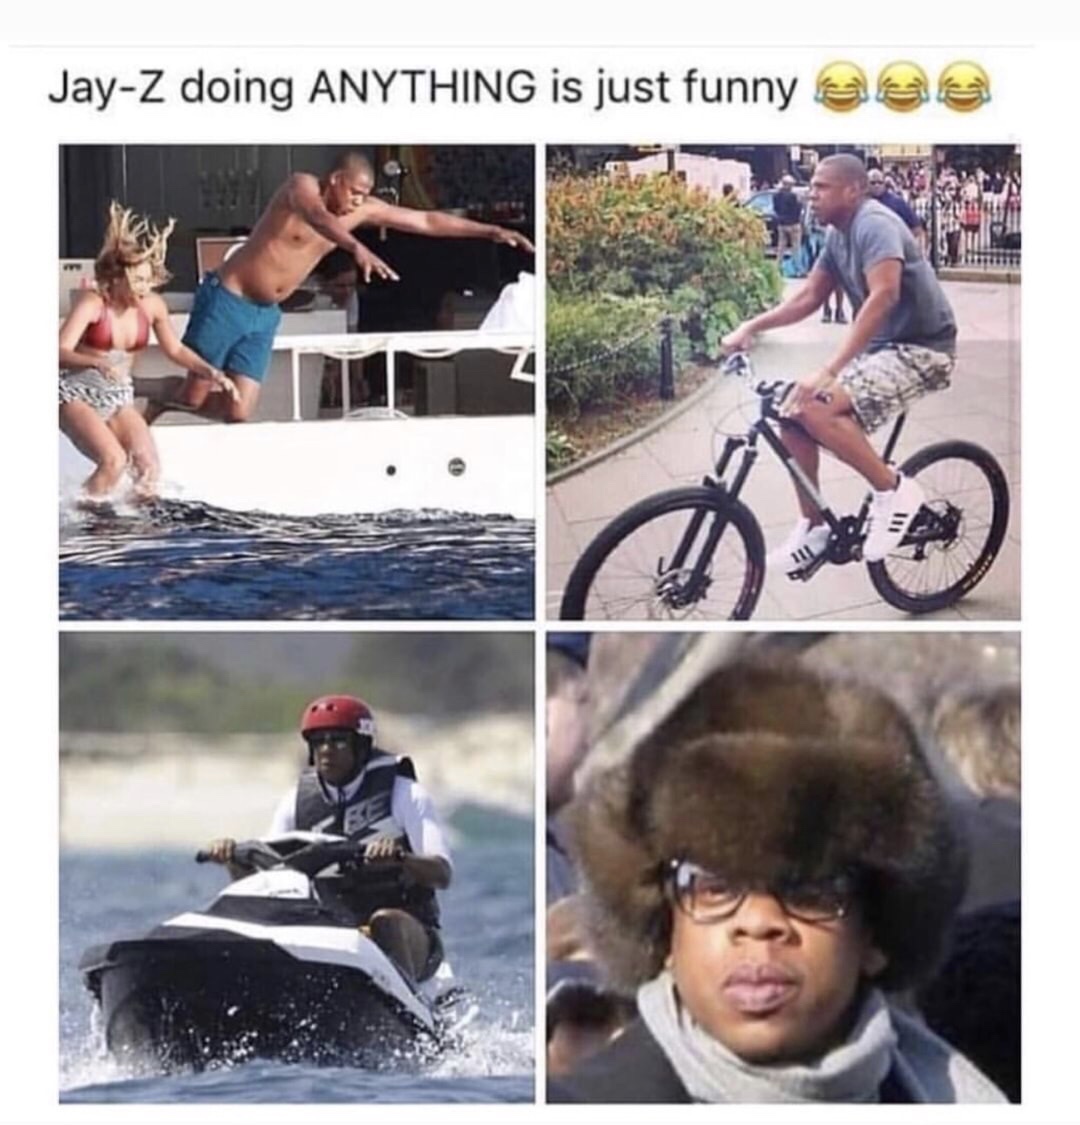 jay z memes - JayZ doing Anything is just funny a